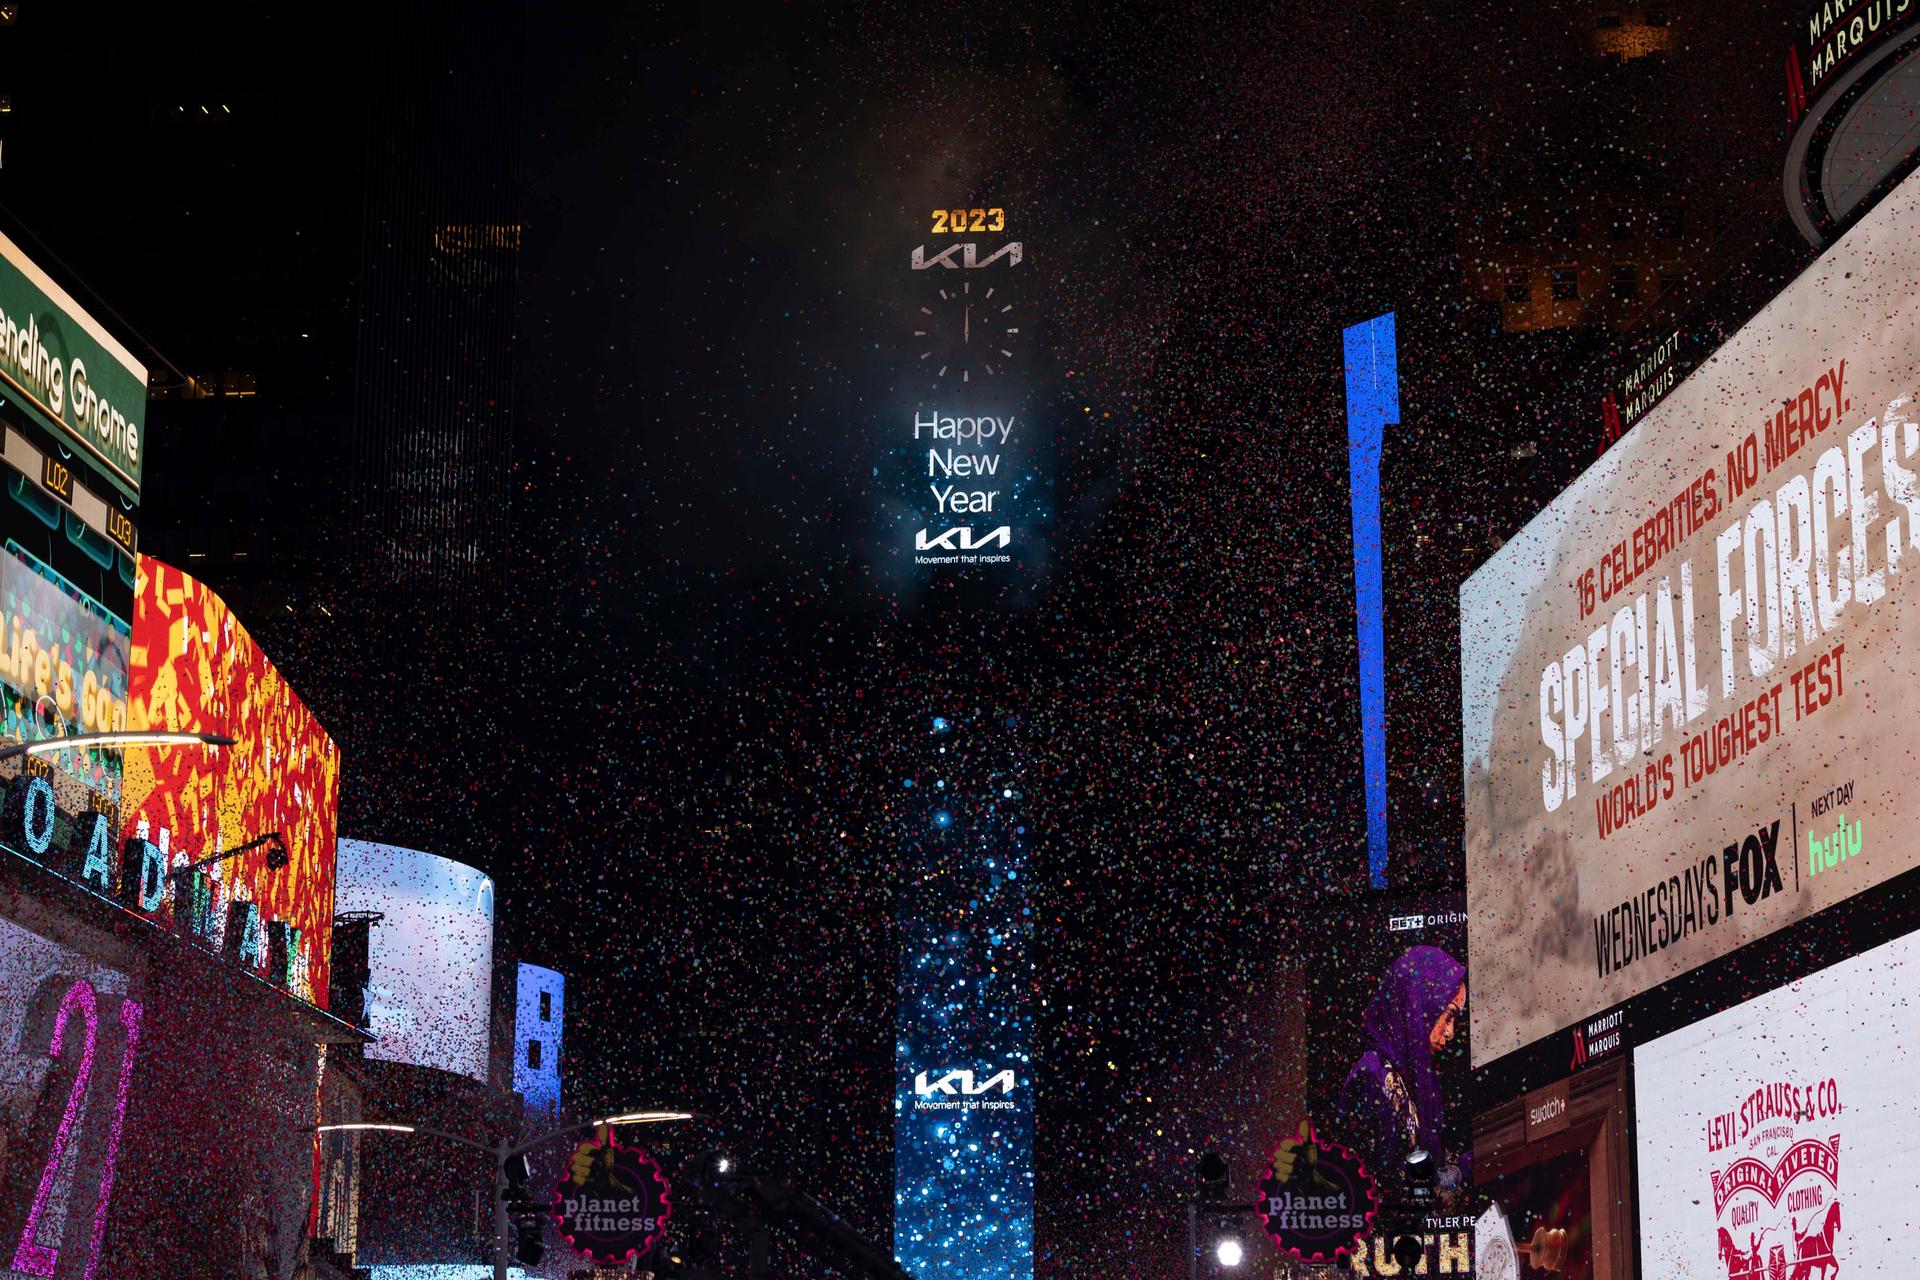 New Years Eve at Times Square, NYC